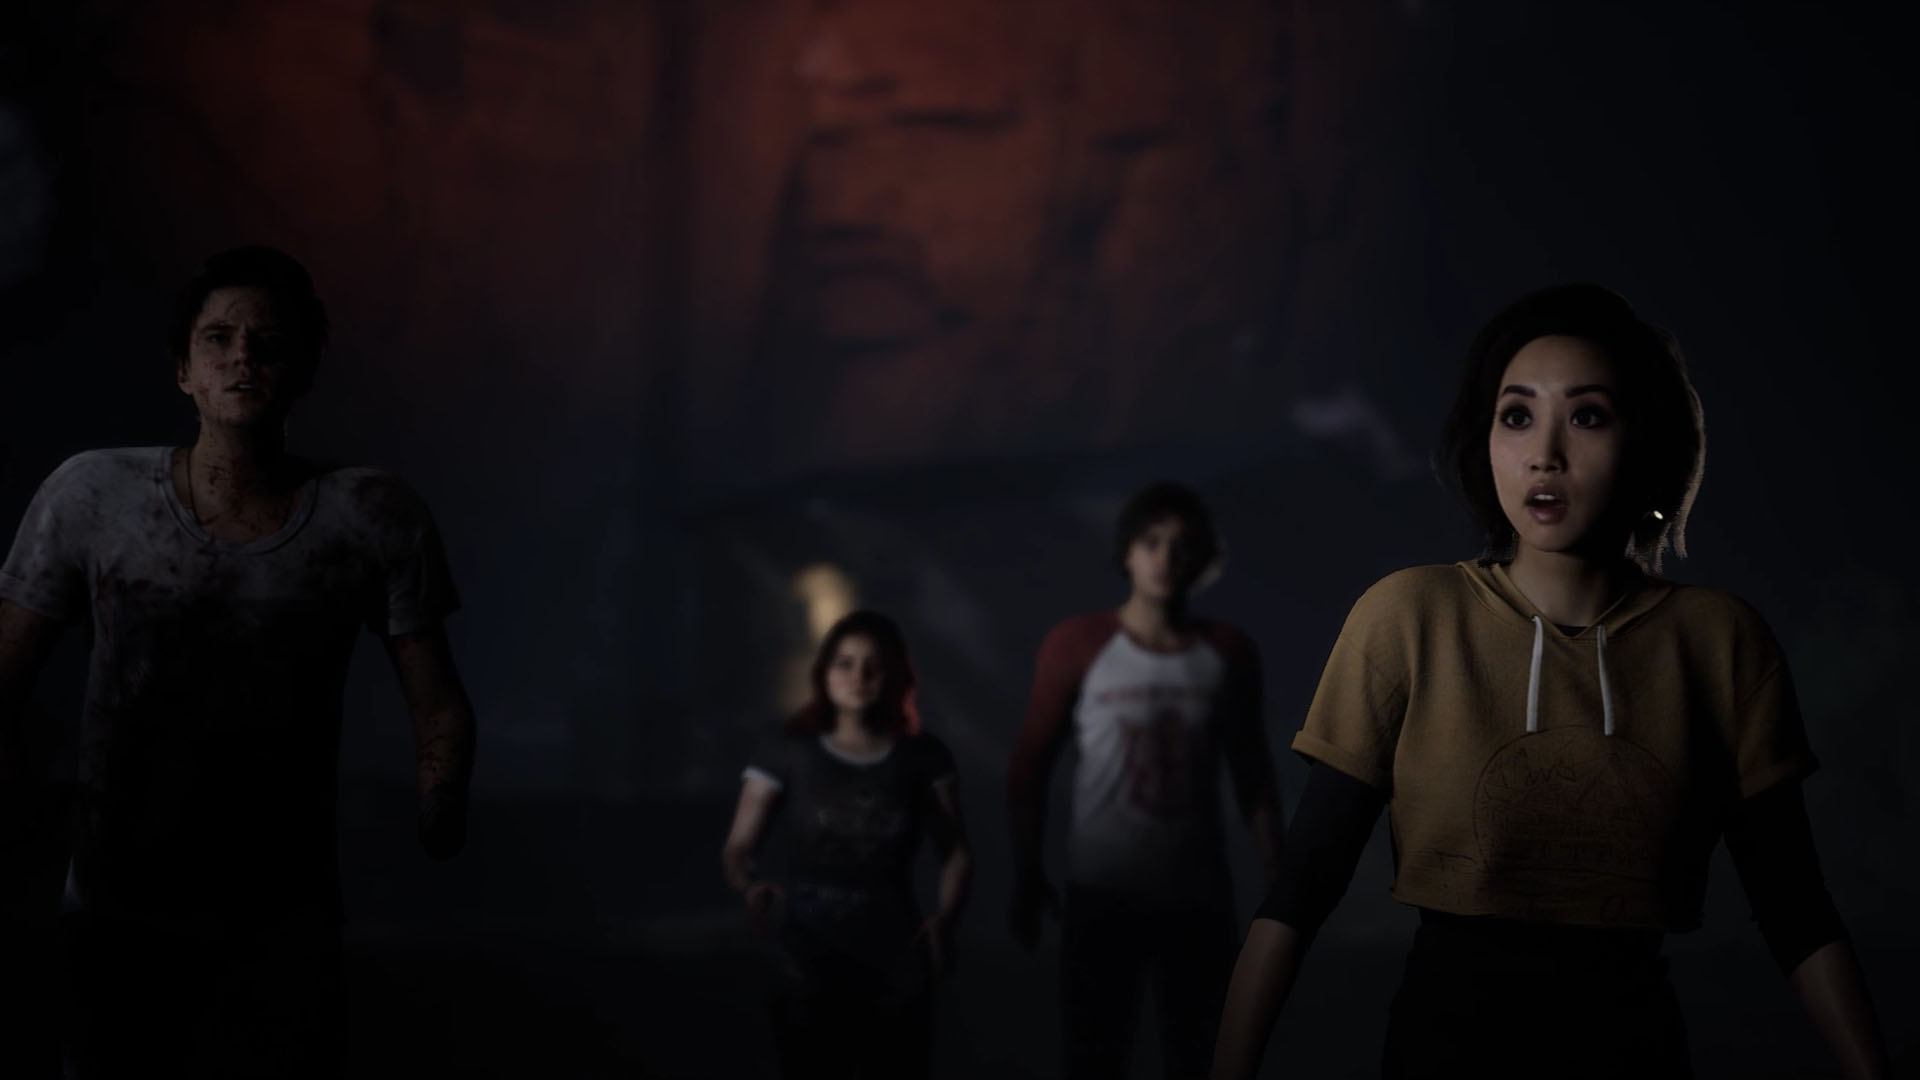 The Quarry gameplay overview trailer shows off more of the pubescent horror adventure